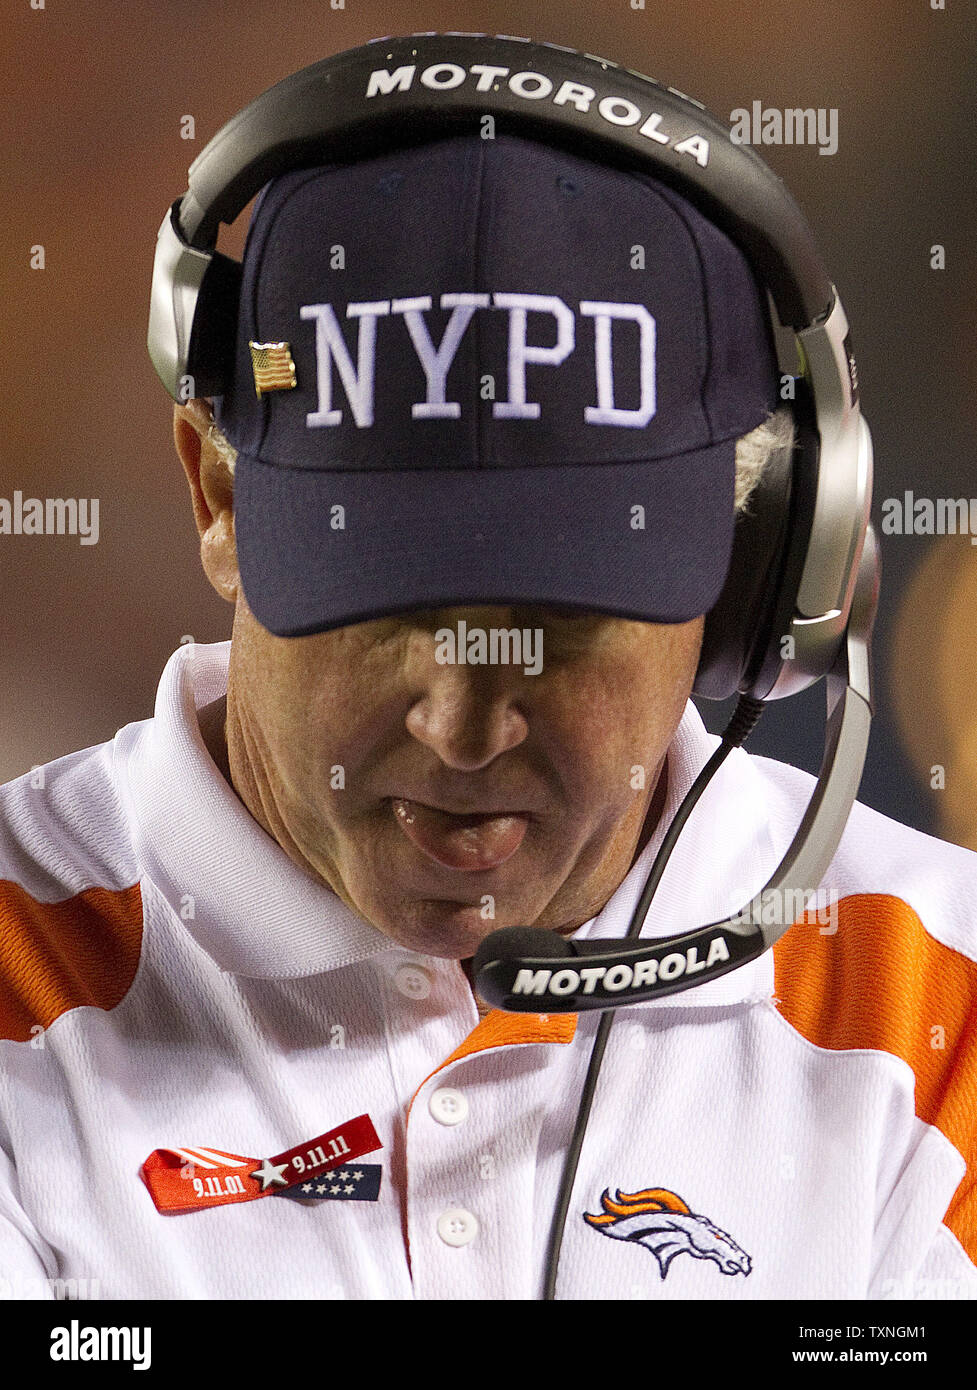 Denver Broncos head coach John Fox loses his first regular season game with the Broncos against the arch rival Oakland Raiders at Sports Authority Field at Mile High on September 12, 2011 in Denver.   Fox wore a New York police department to honor the tenth anniversary of the 9-11 attacks.    Denver lost 23-20 to Oakland.     UPI/Gary C. Caskey Stock Photo